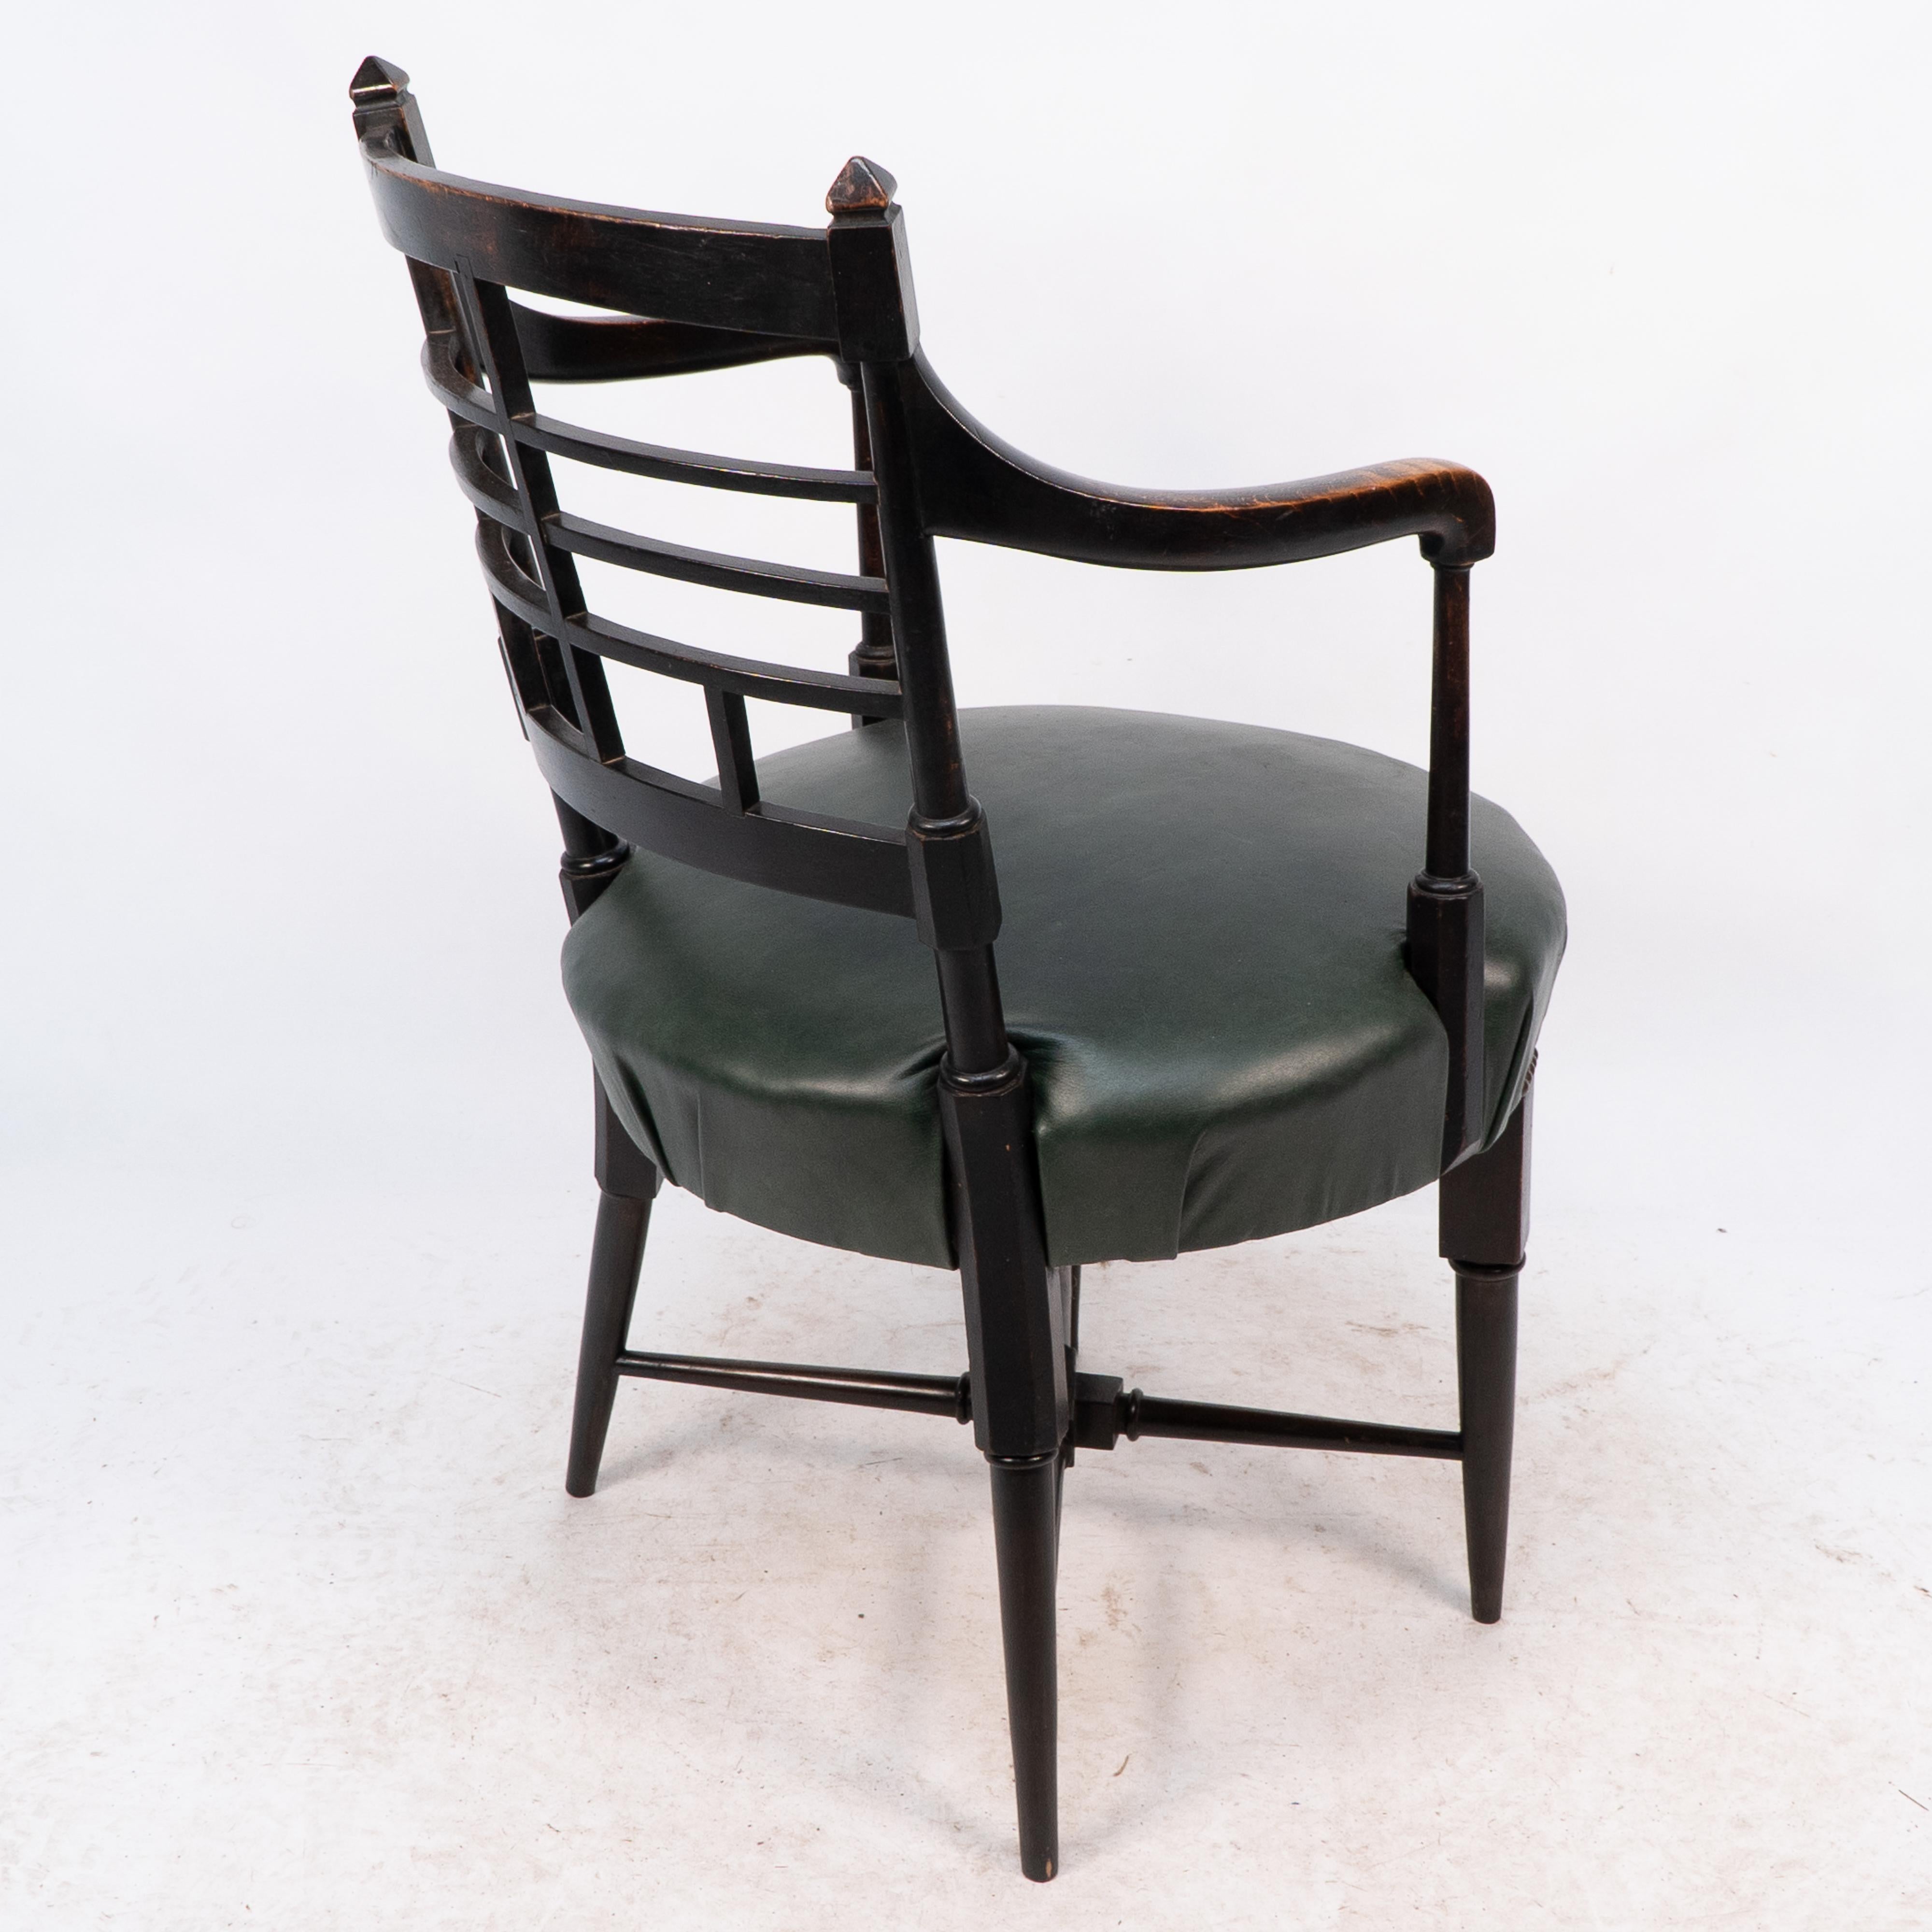 E W Godwin for William Watt. An Anglo-Japanese Old English or Jacobean armchair For Sale 7